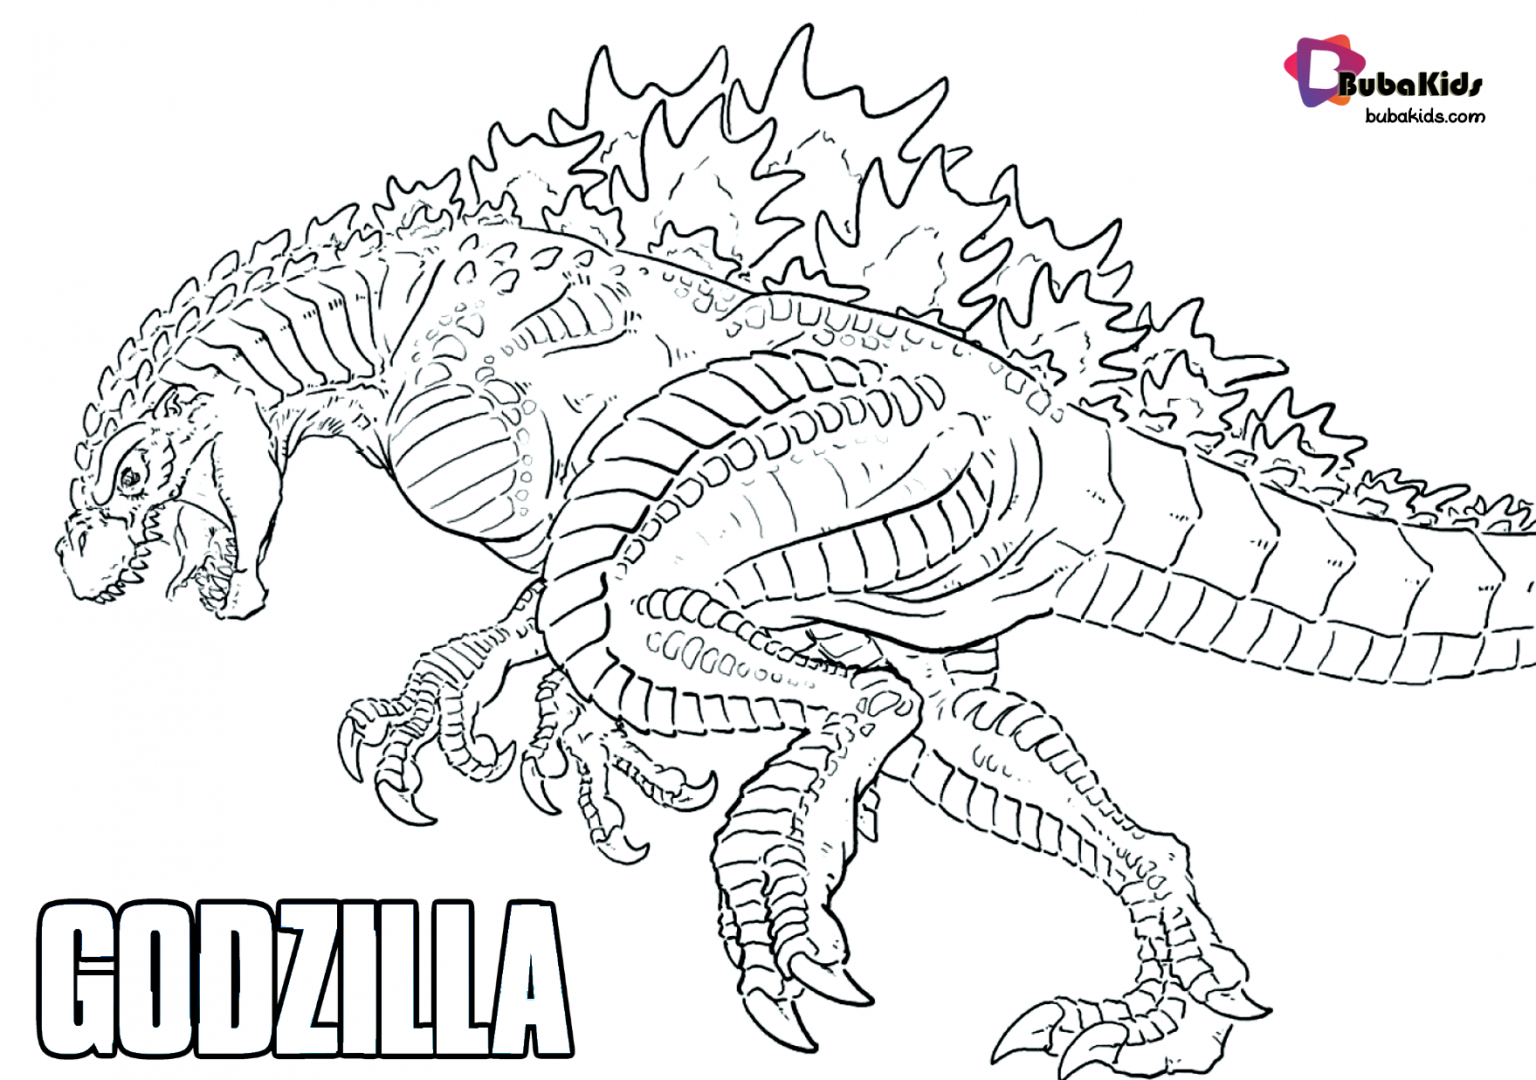 Godzilla king of monsters free printable coloring page.